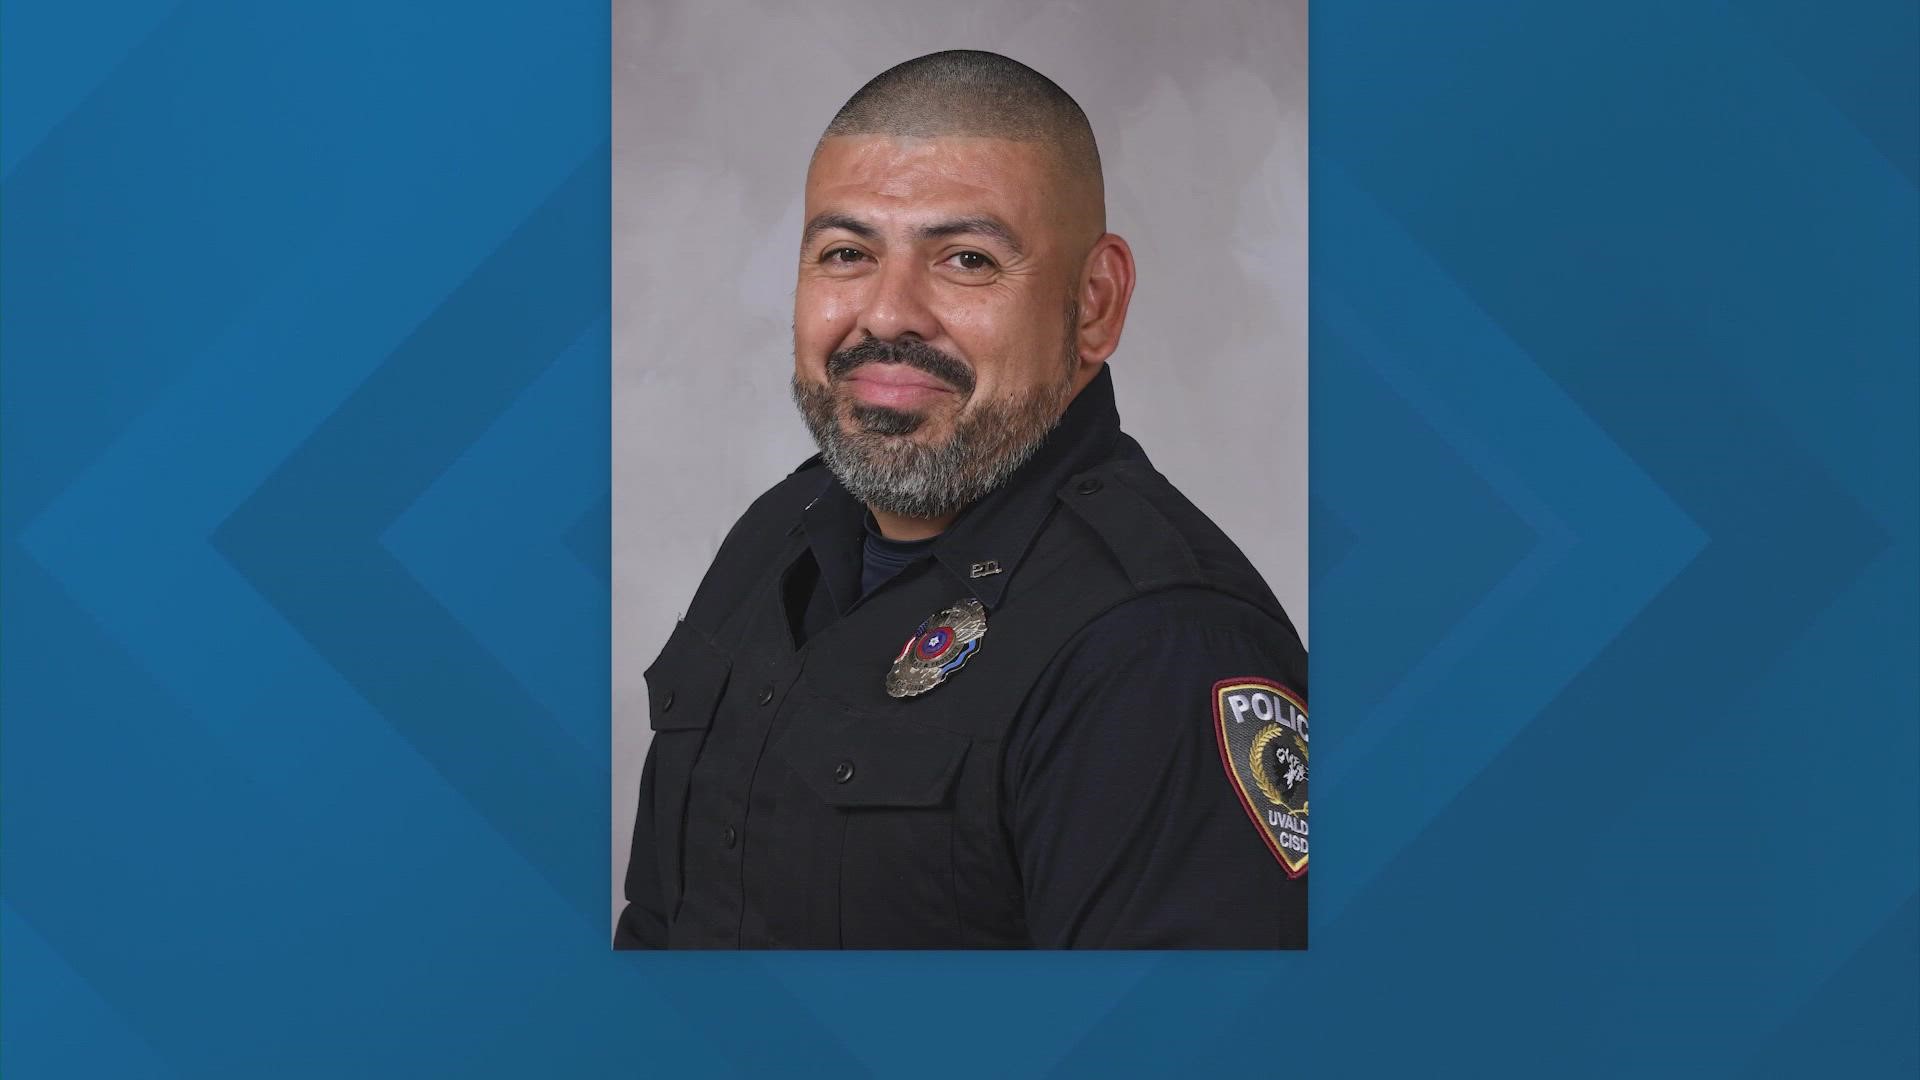 Ruben Ruiz was restrained by fellow officers after his wife, Eva Mireles, told him she had been shot. He was among the first to arrive at the scene.